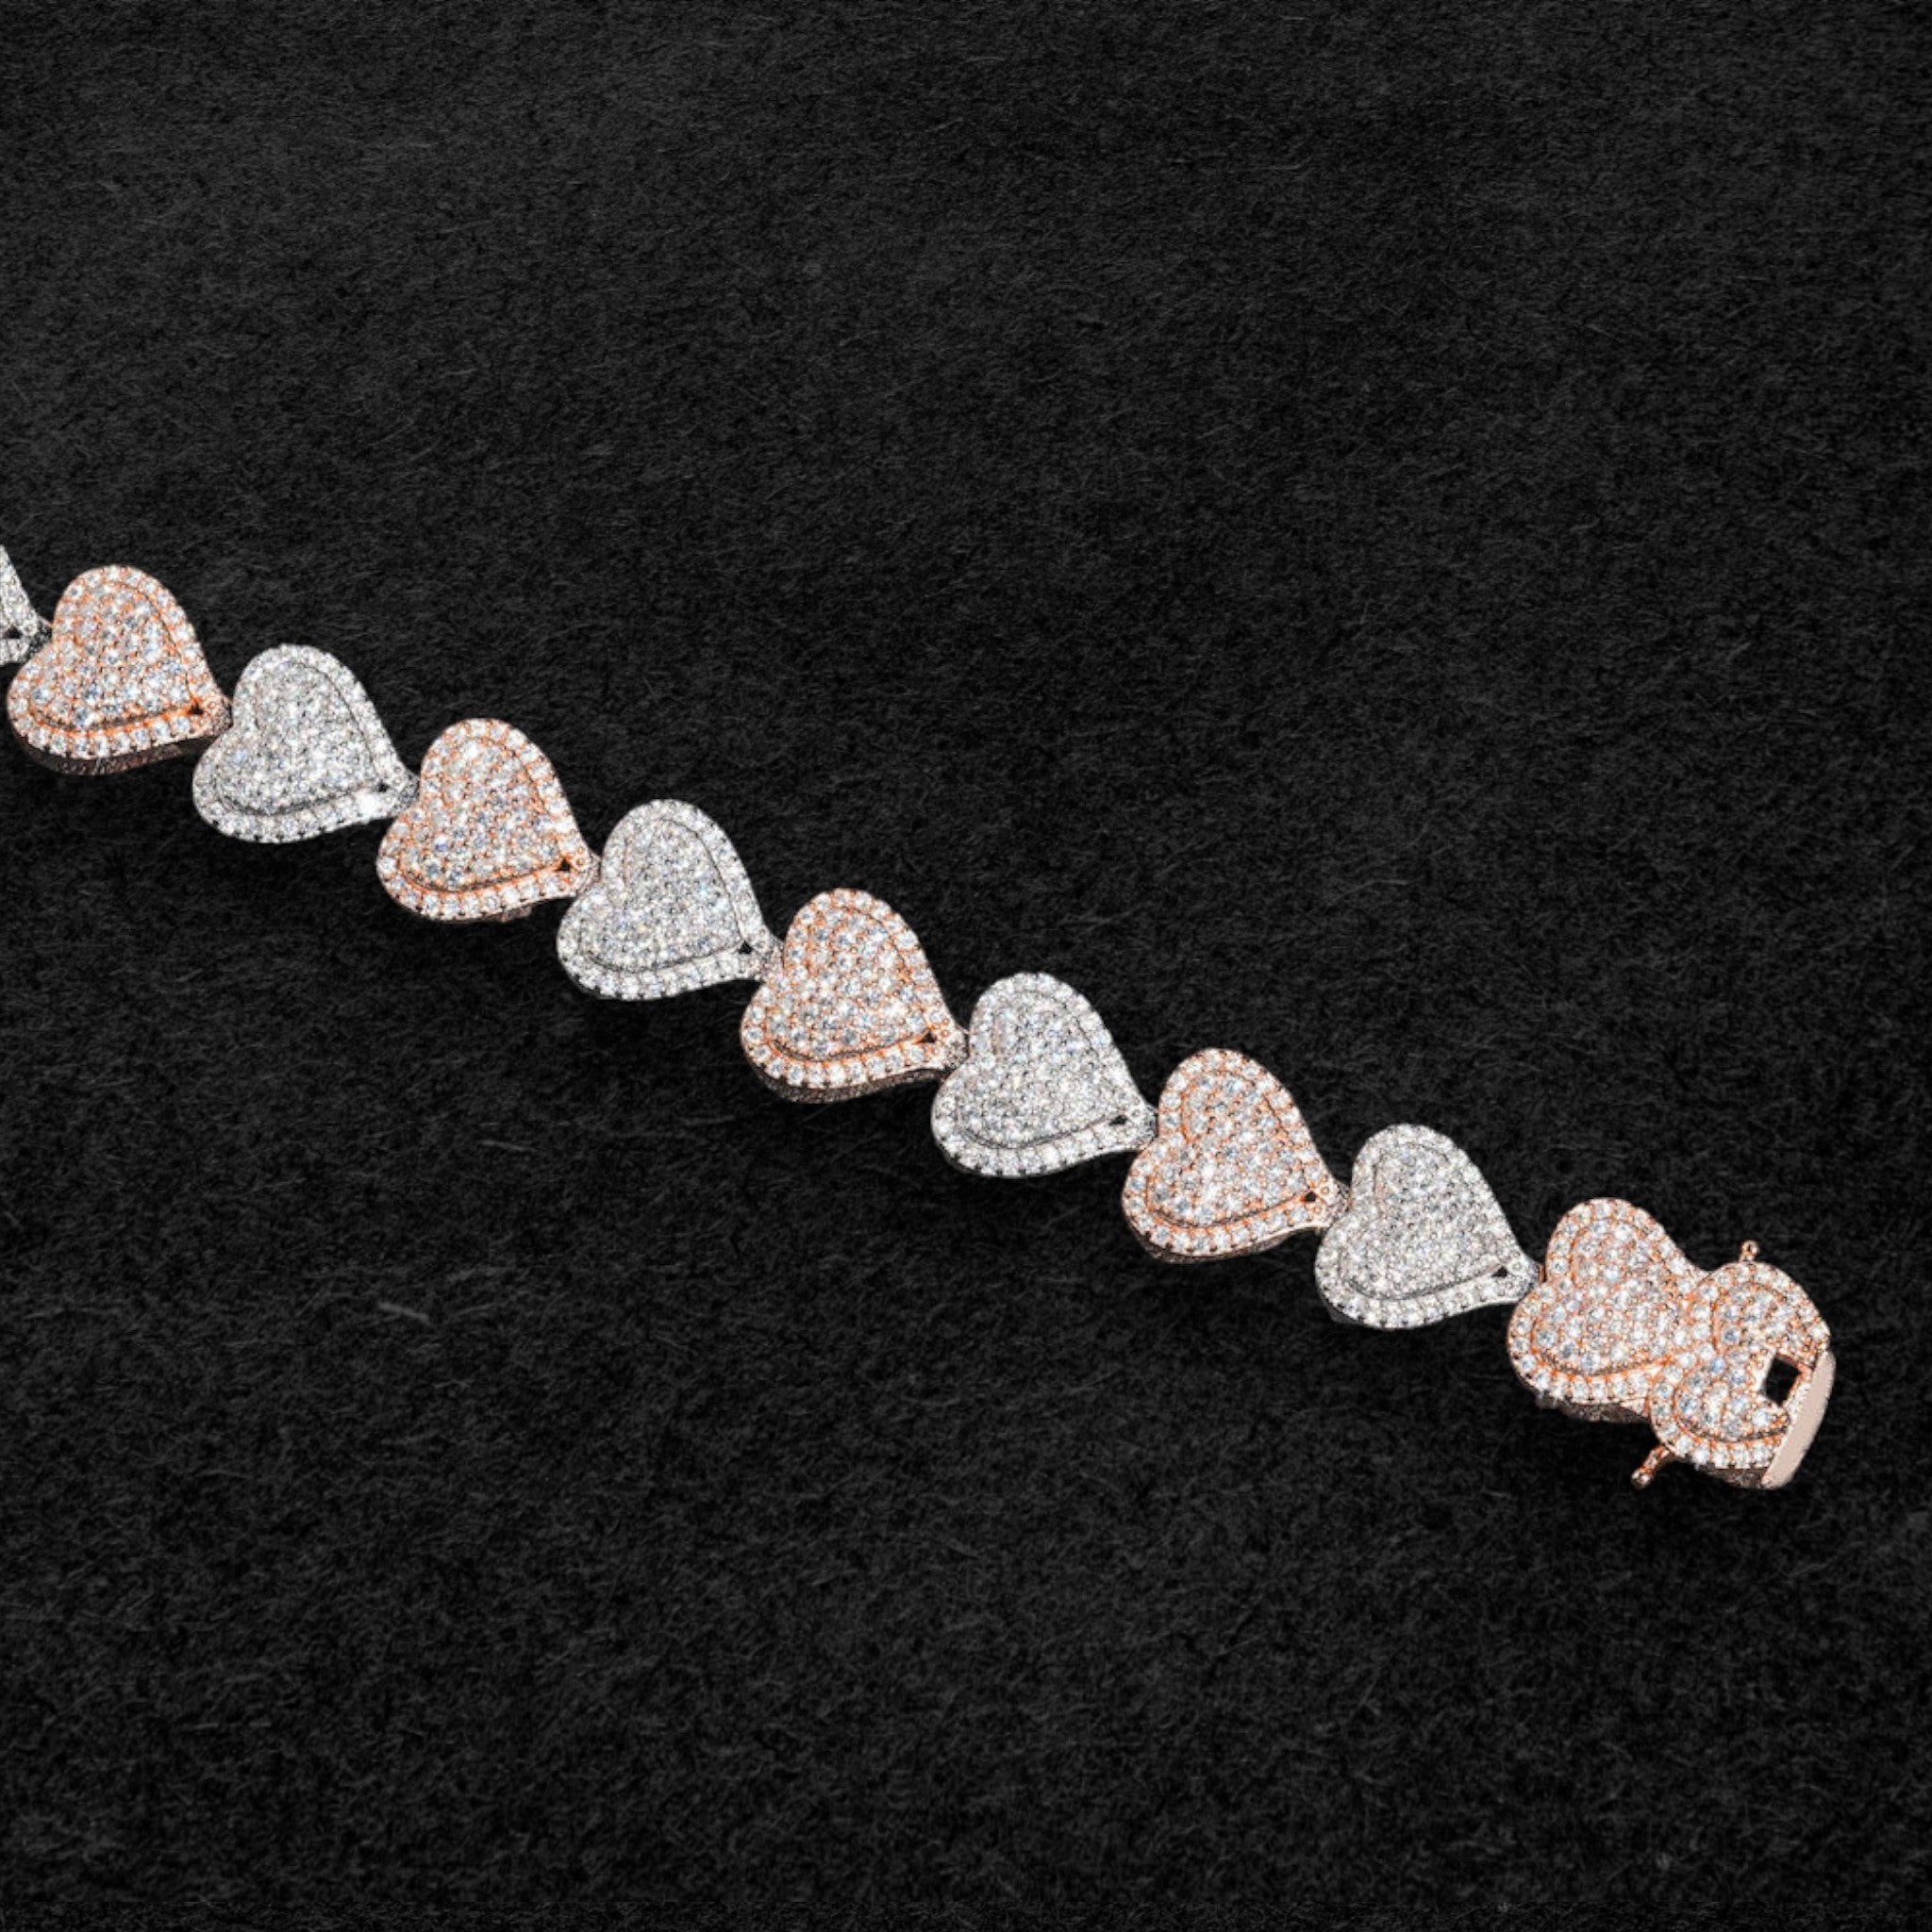 Two Tone Iced Out Baguette Heart Tennis Bracelet - 13MM